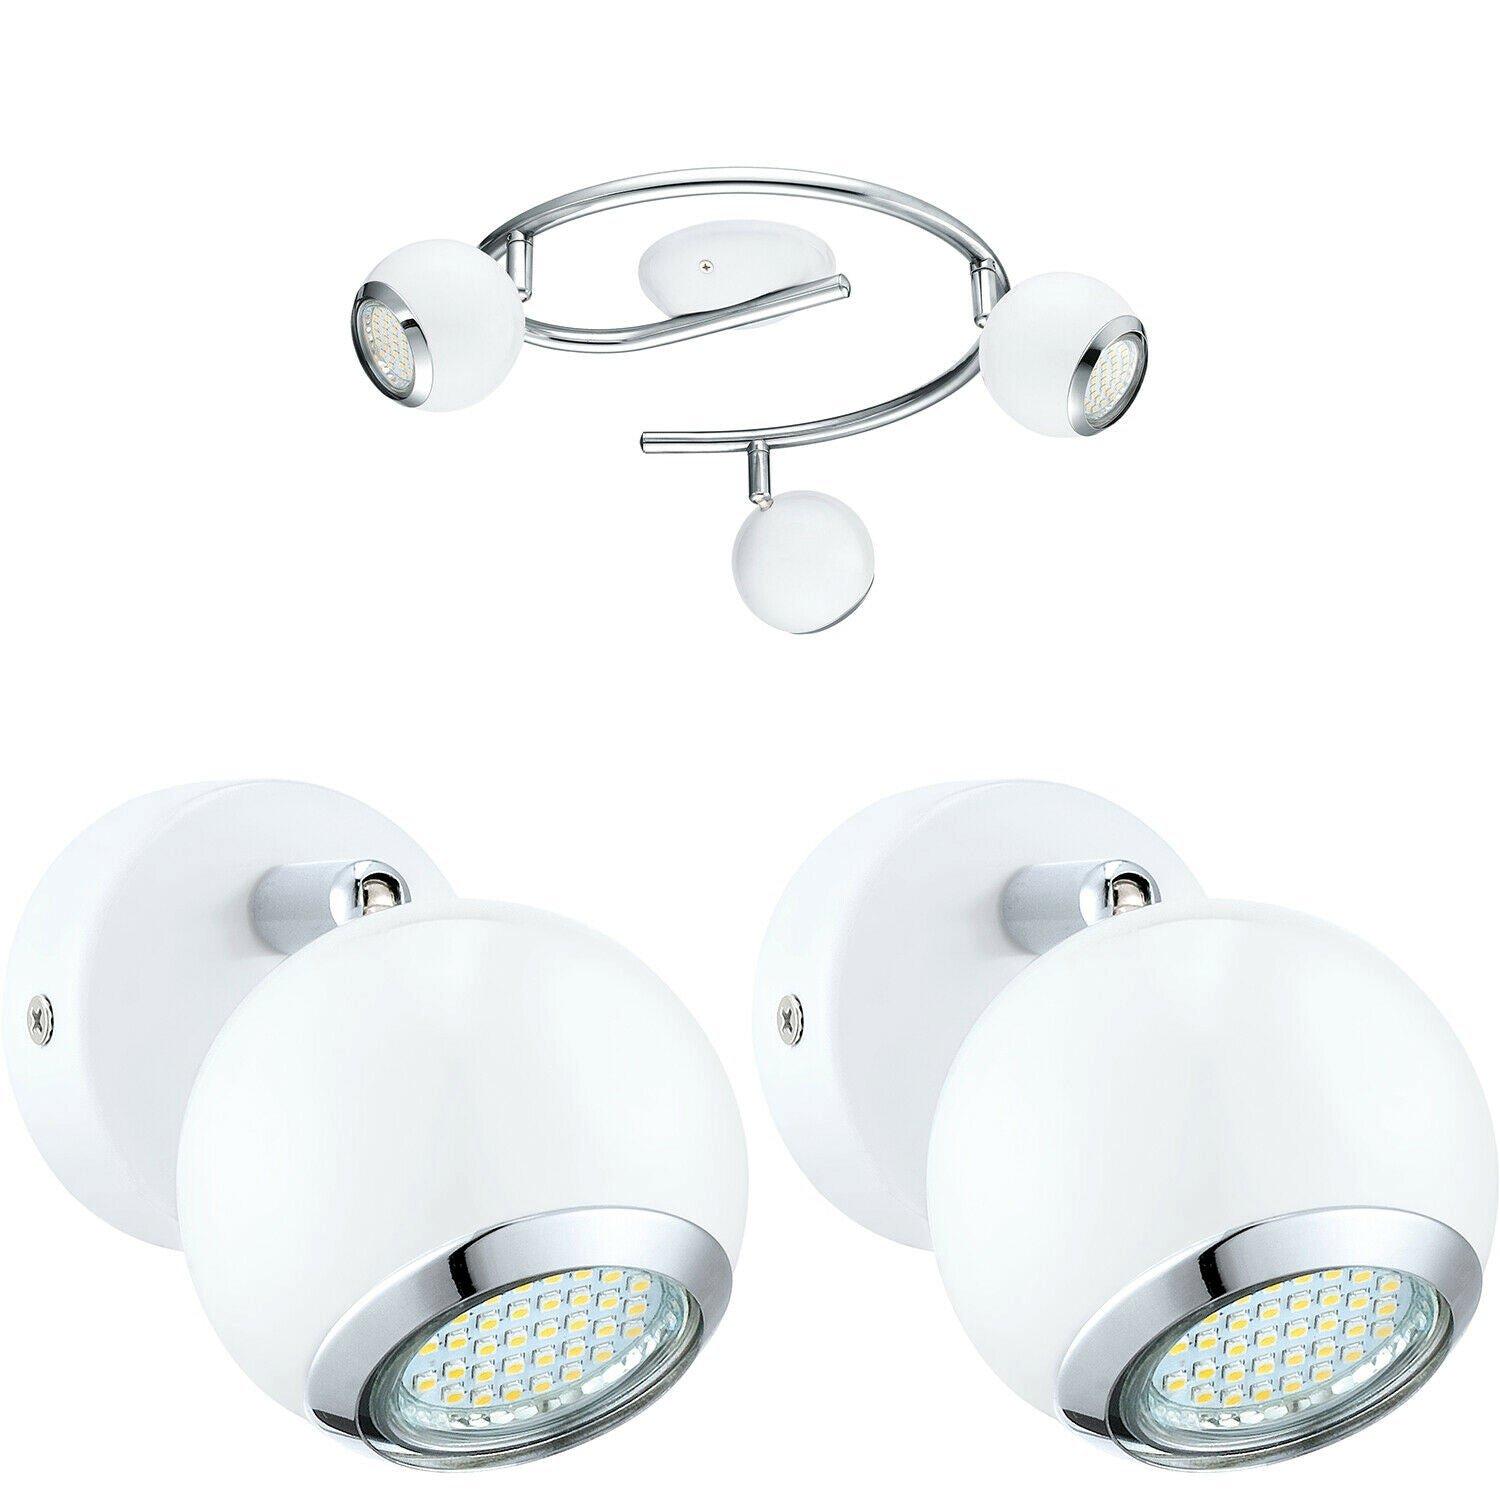 Ceiling Spot Light & 2x Matching Wall Lights White Chrome Round Adjustable Lamp